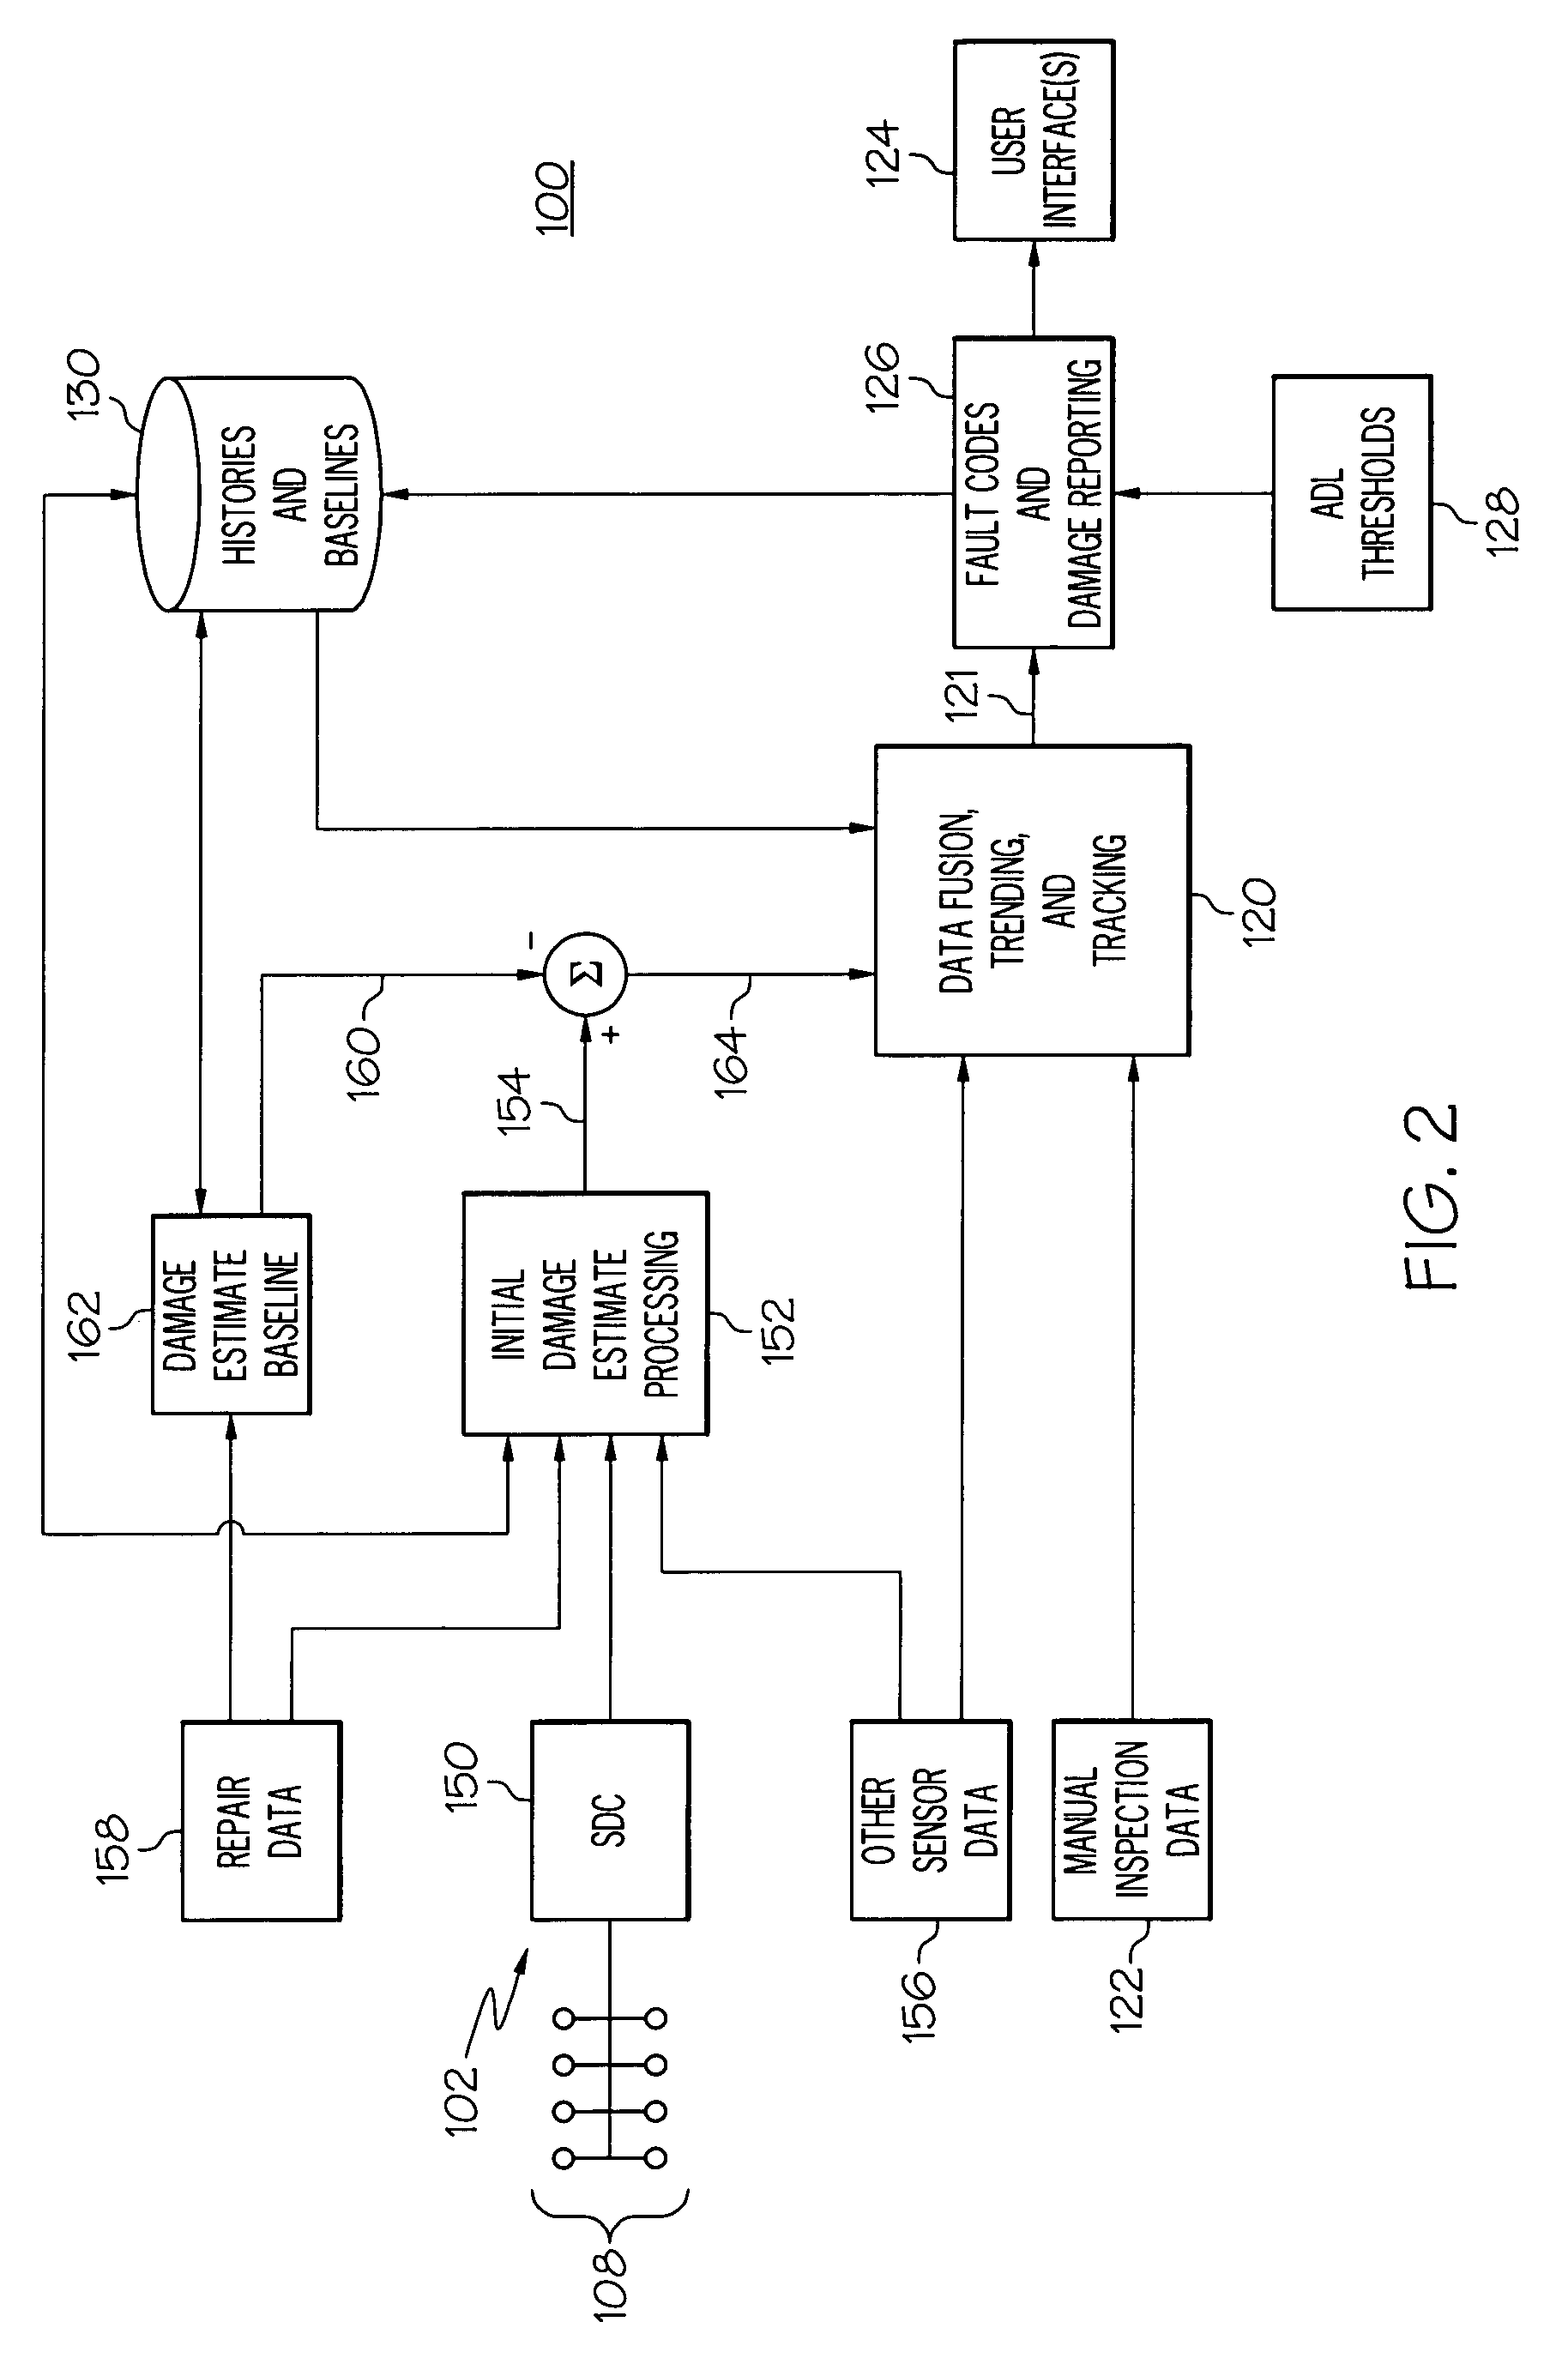 Structure health monitoring system and method